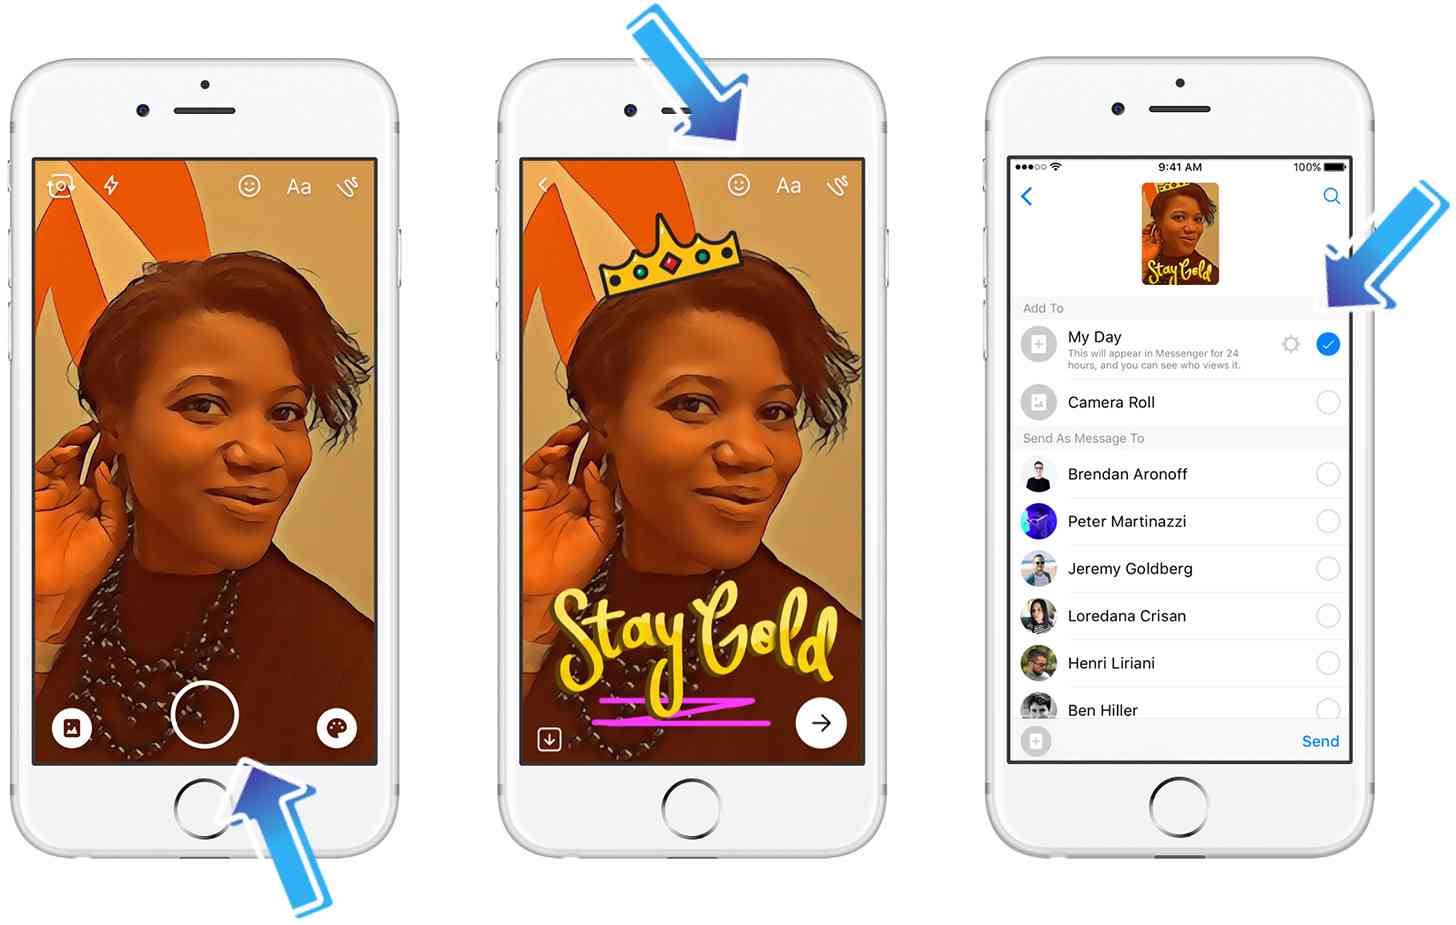 Facebook Messenger Day Snapchat clone features